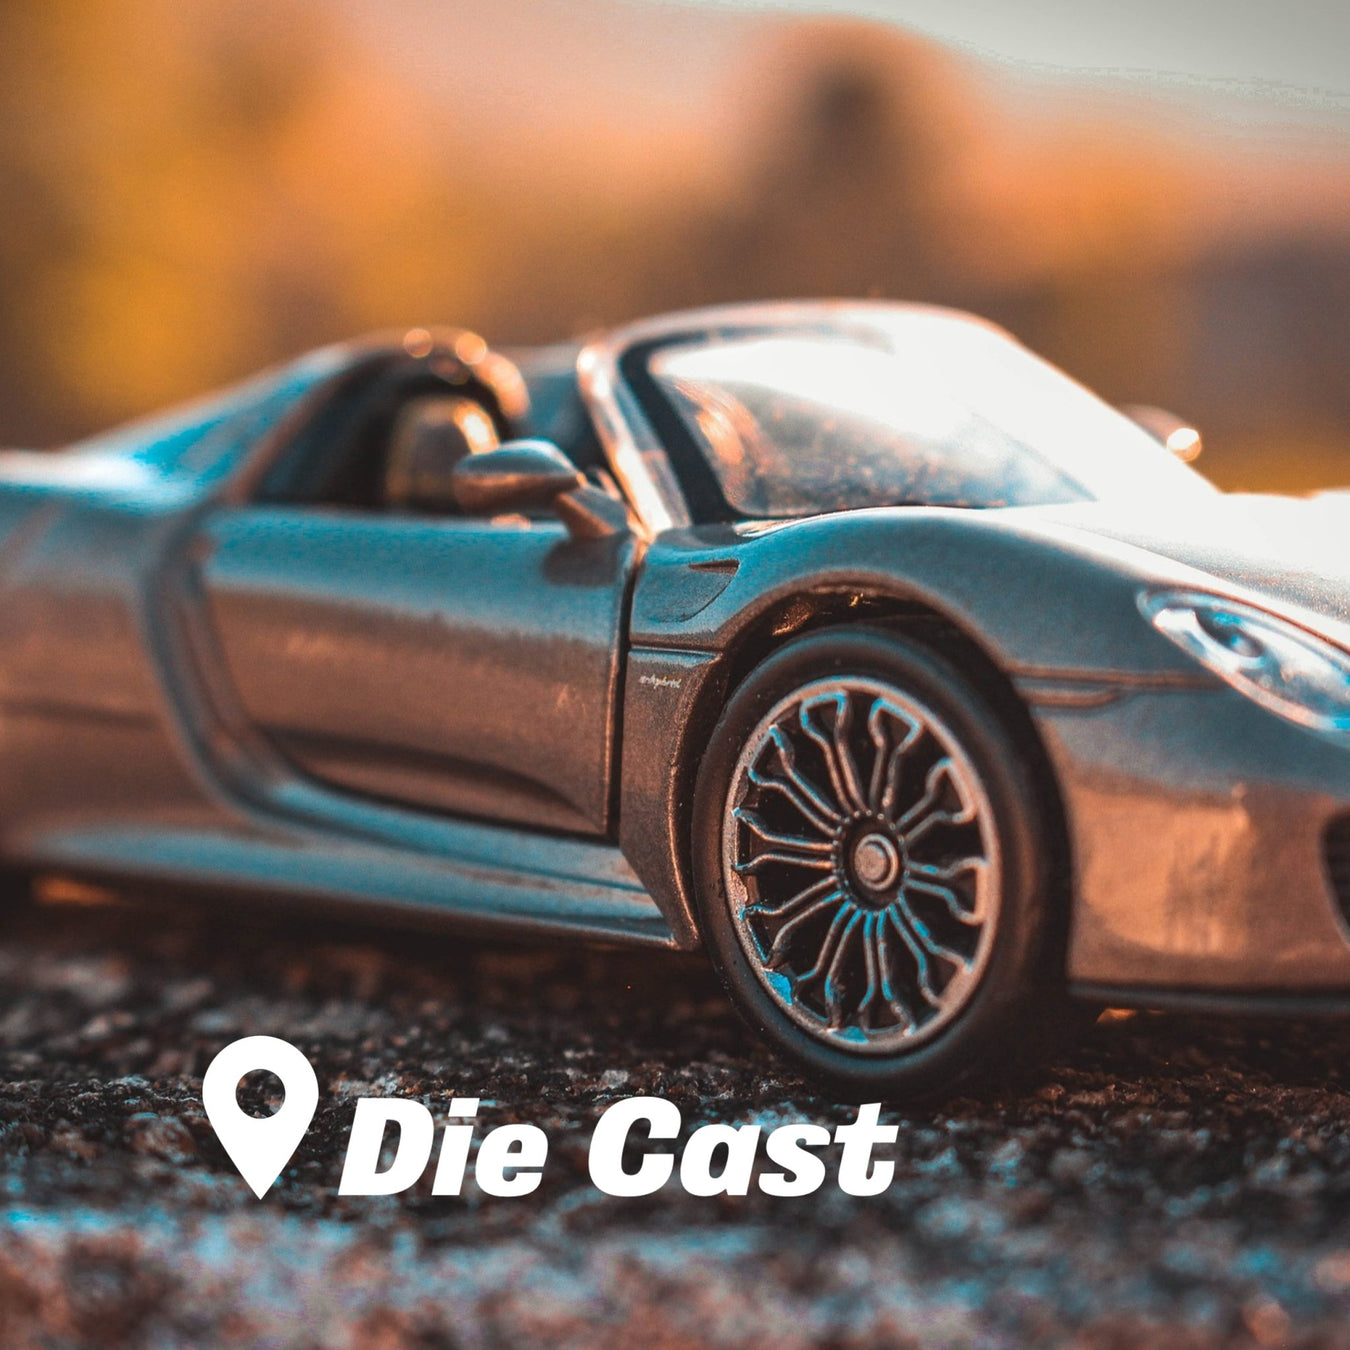 Die Cast | East Coast Collecting